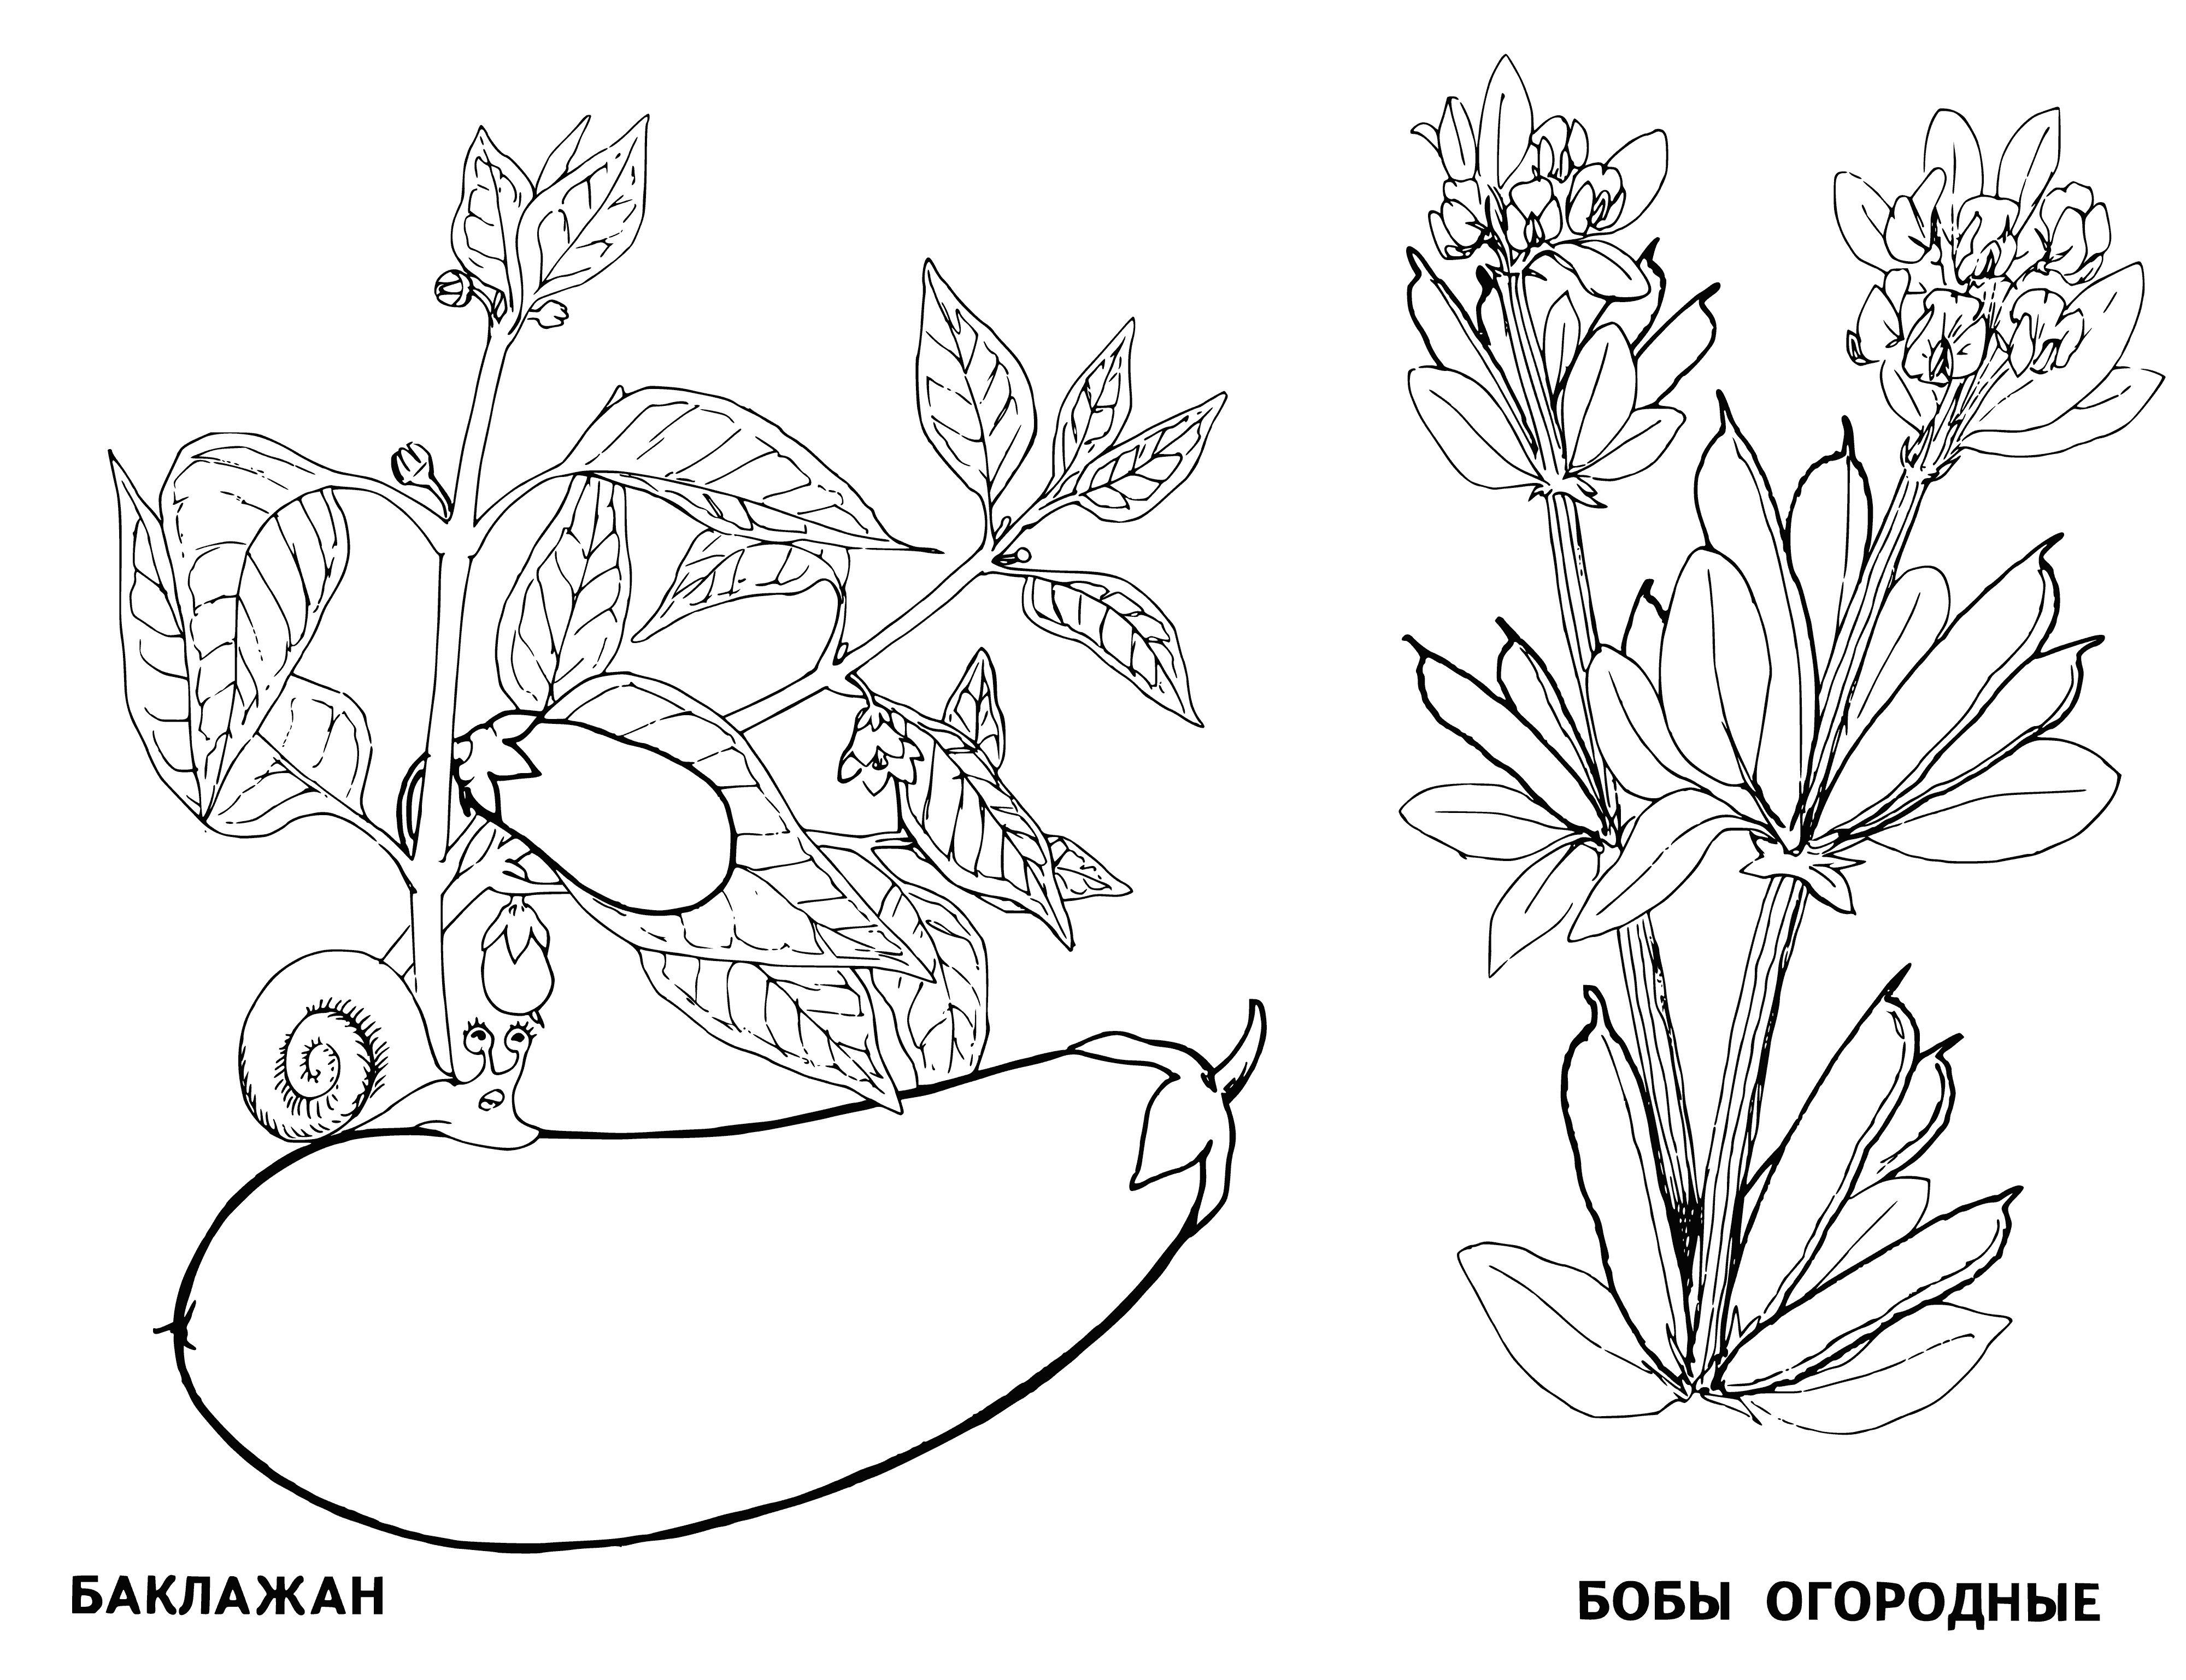 Eggplant and beans coloring page